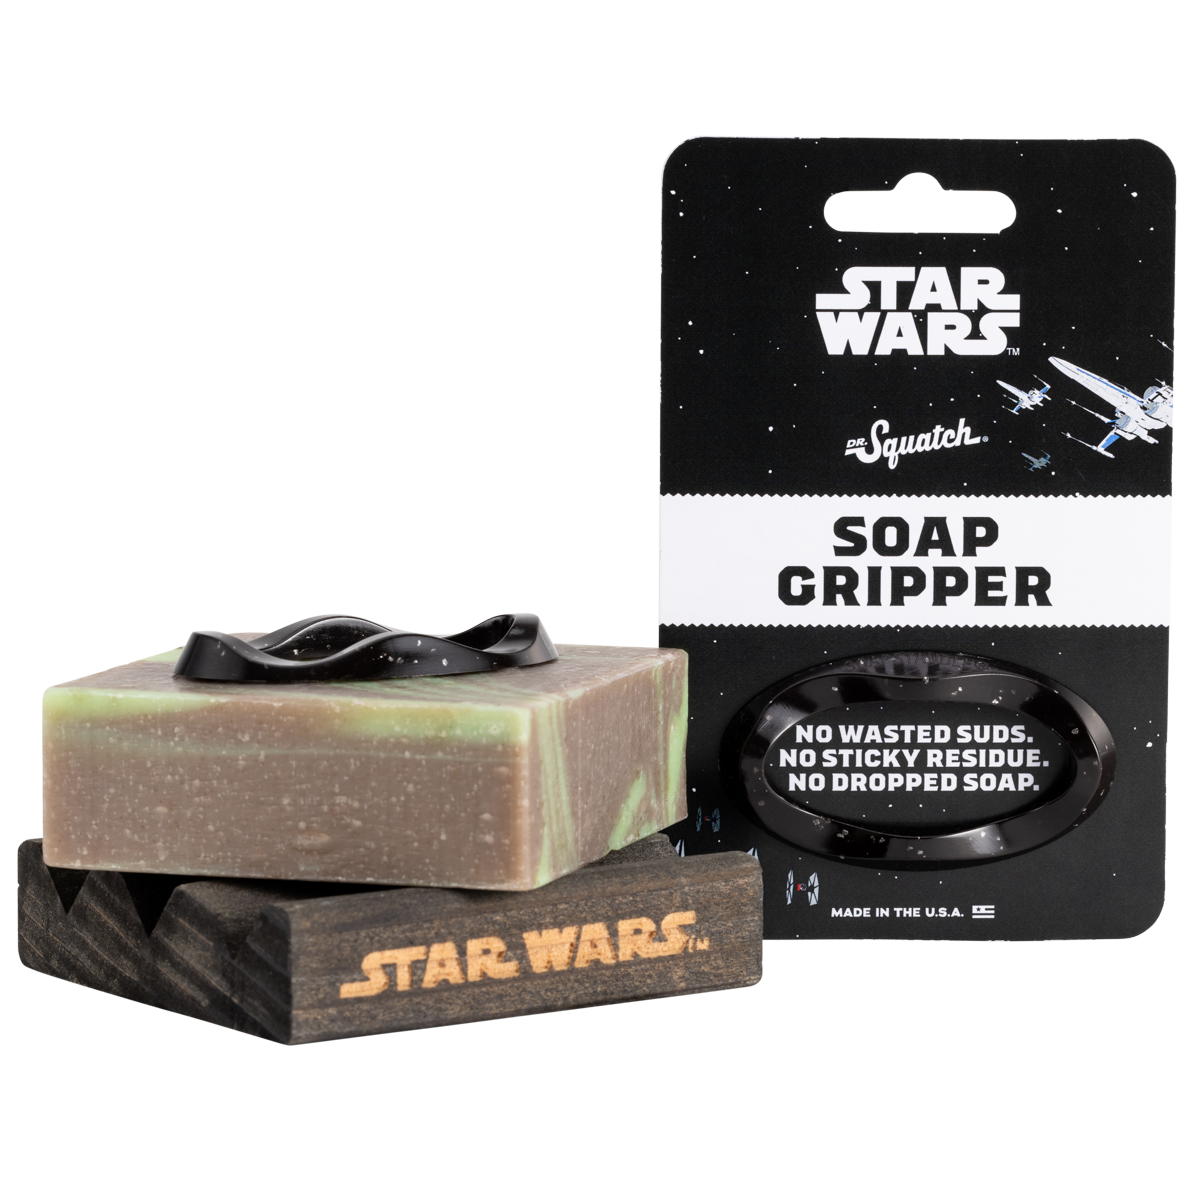 Star Wars Collection Limited Edition Soap From Dr. Squatch with Collector's  Box